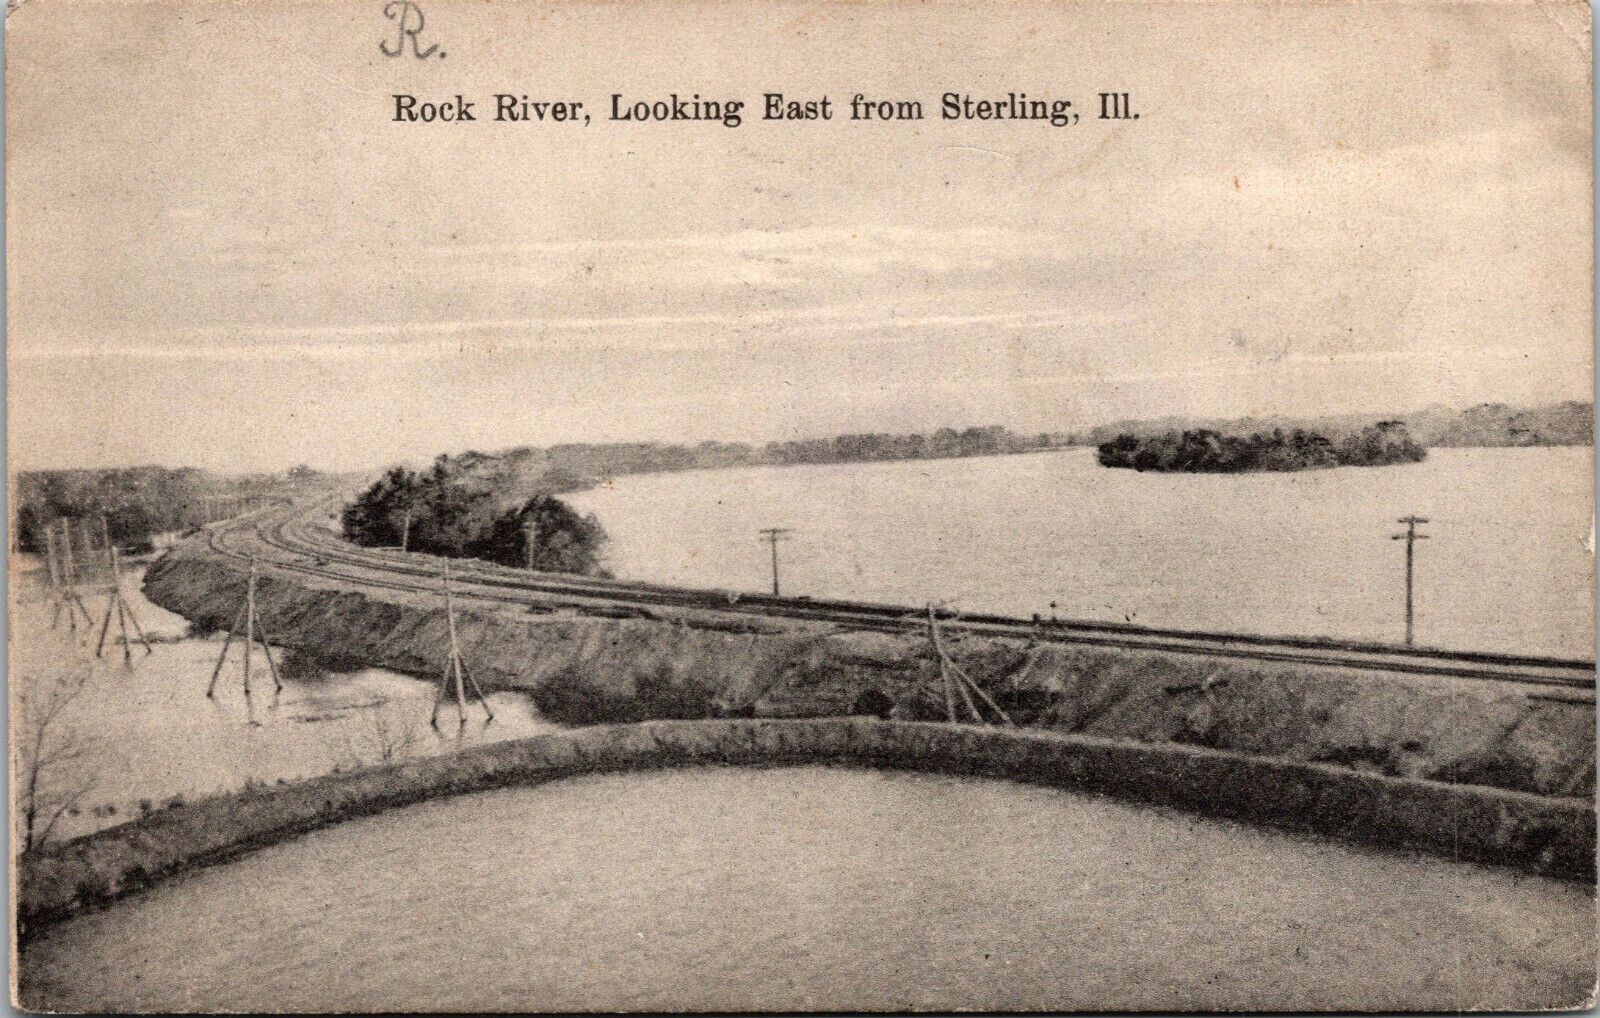 Vtg 1908 Rock River Looking East from Sterling Illionois IL Old Antique Postcard